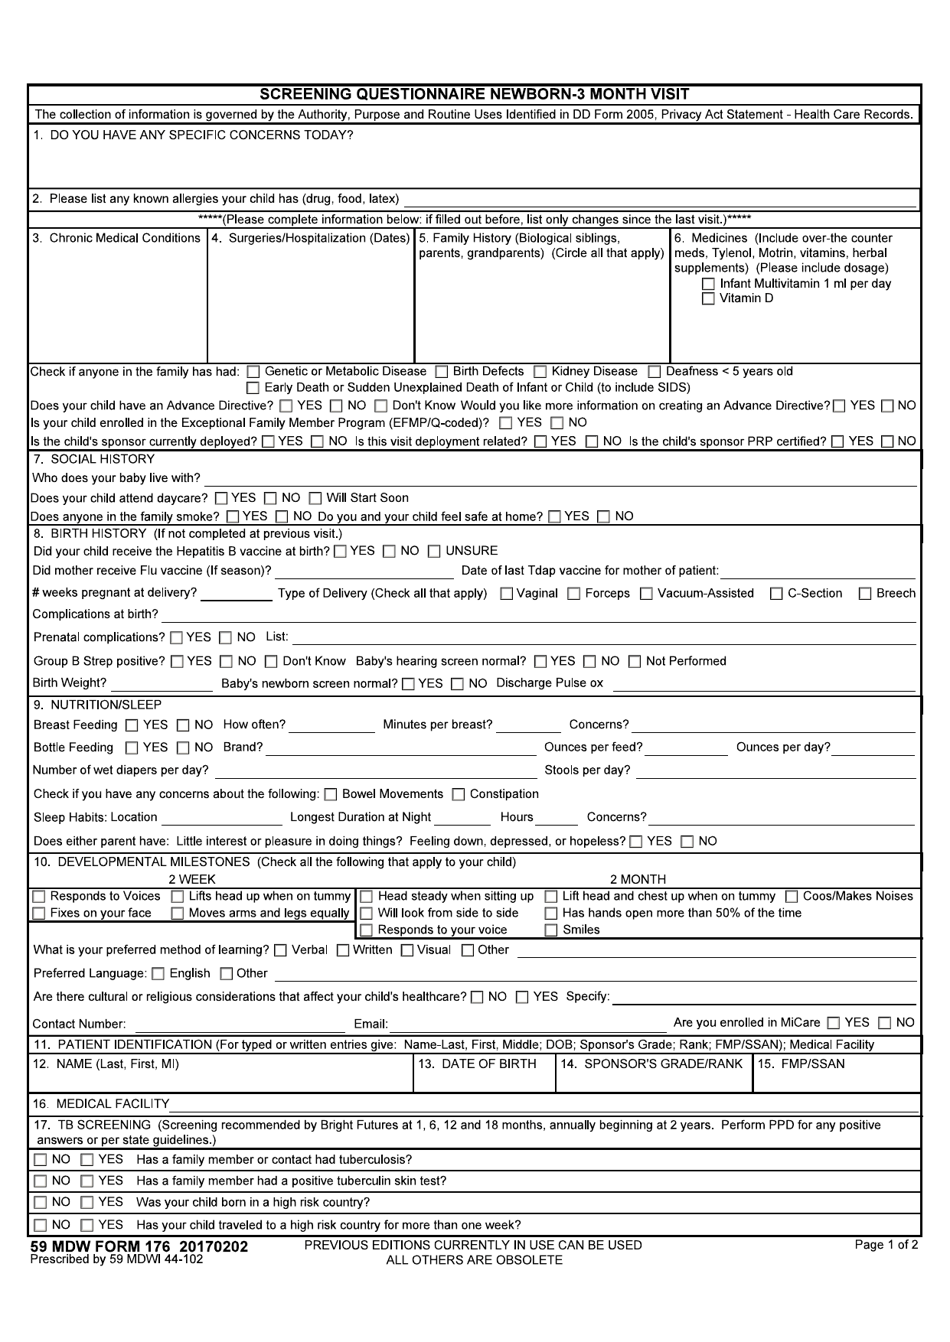 59 MDW Form 176 Screening Questionnaire Newborn-3 Month Visit, Page 1